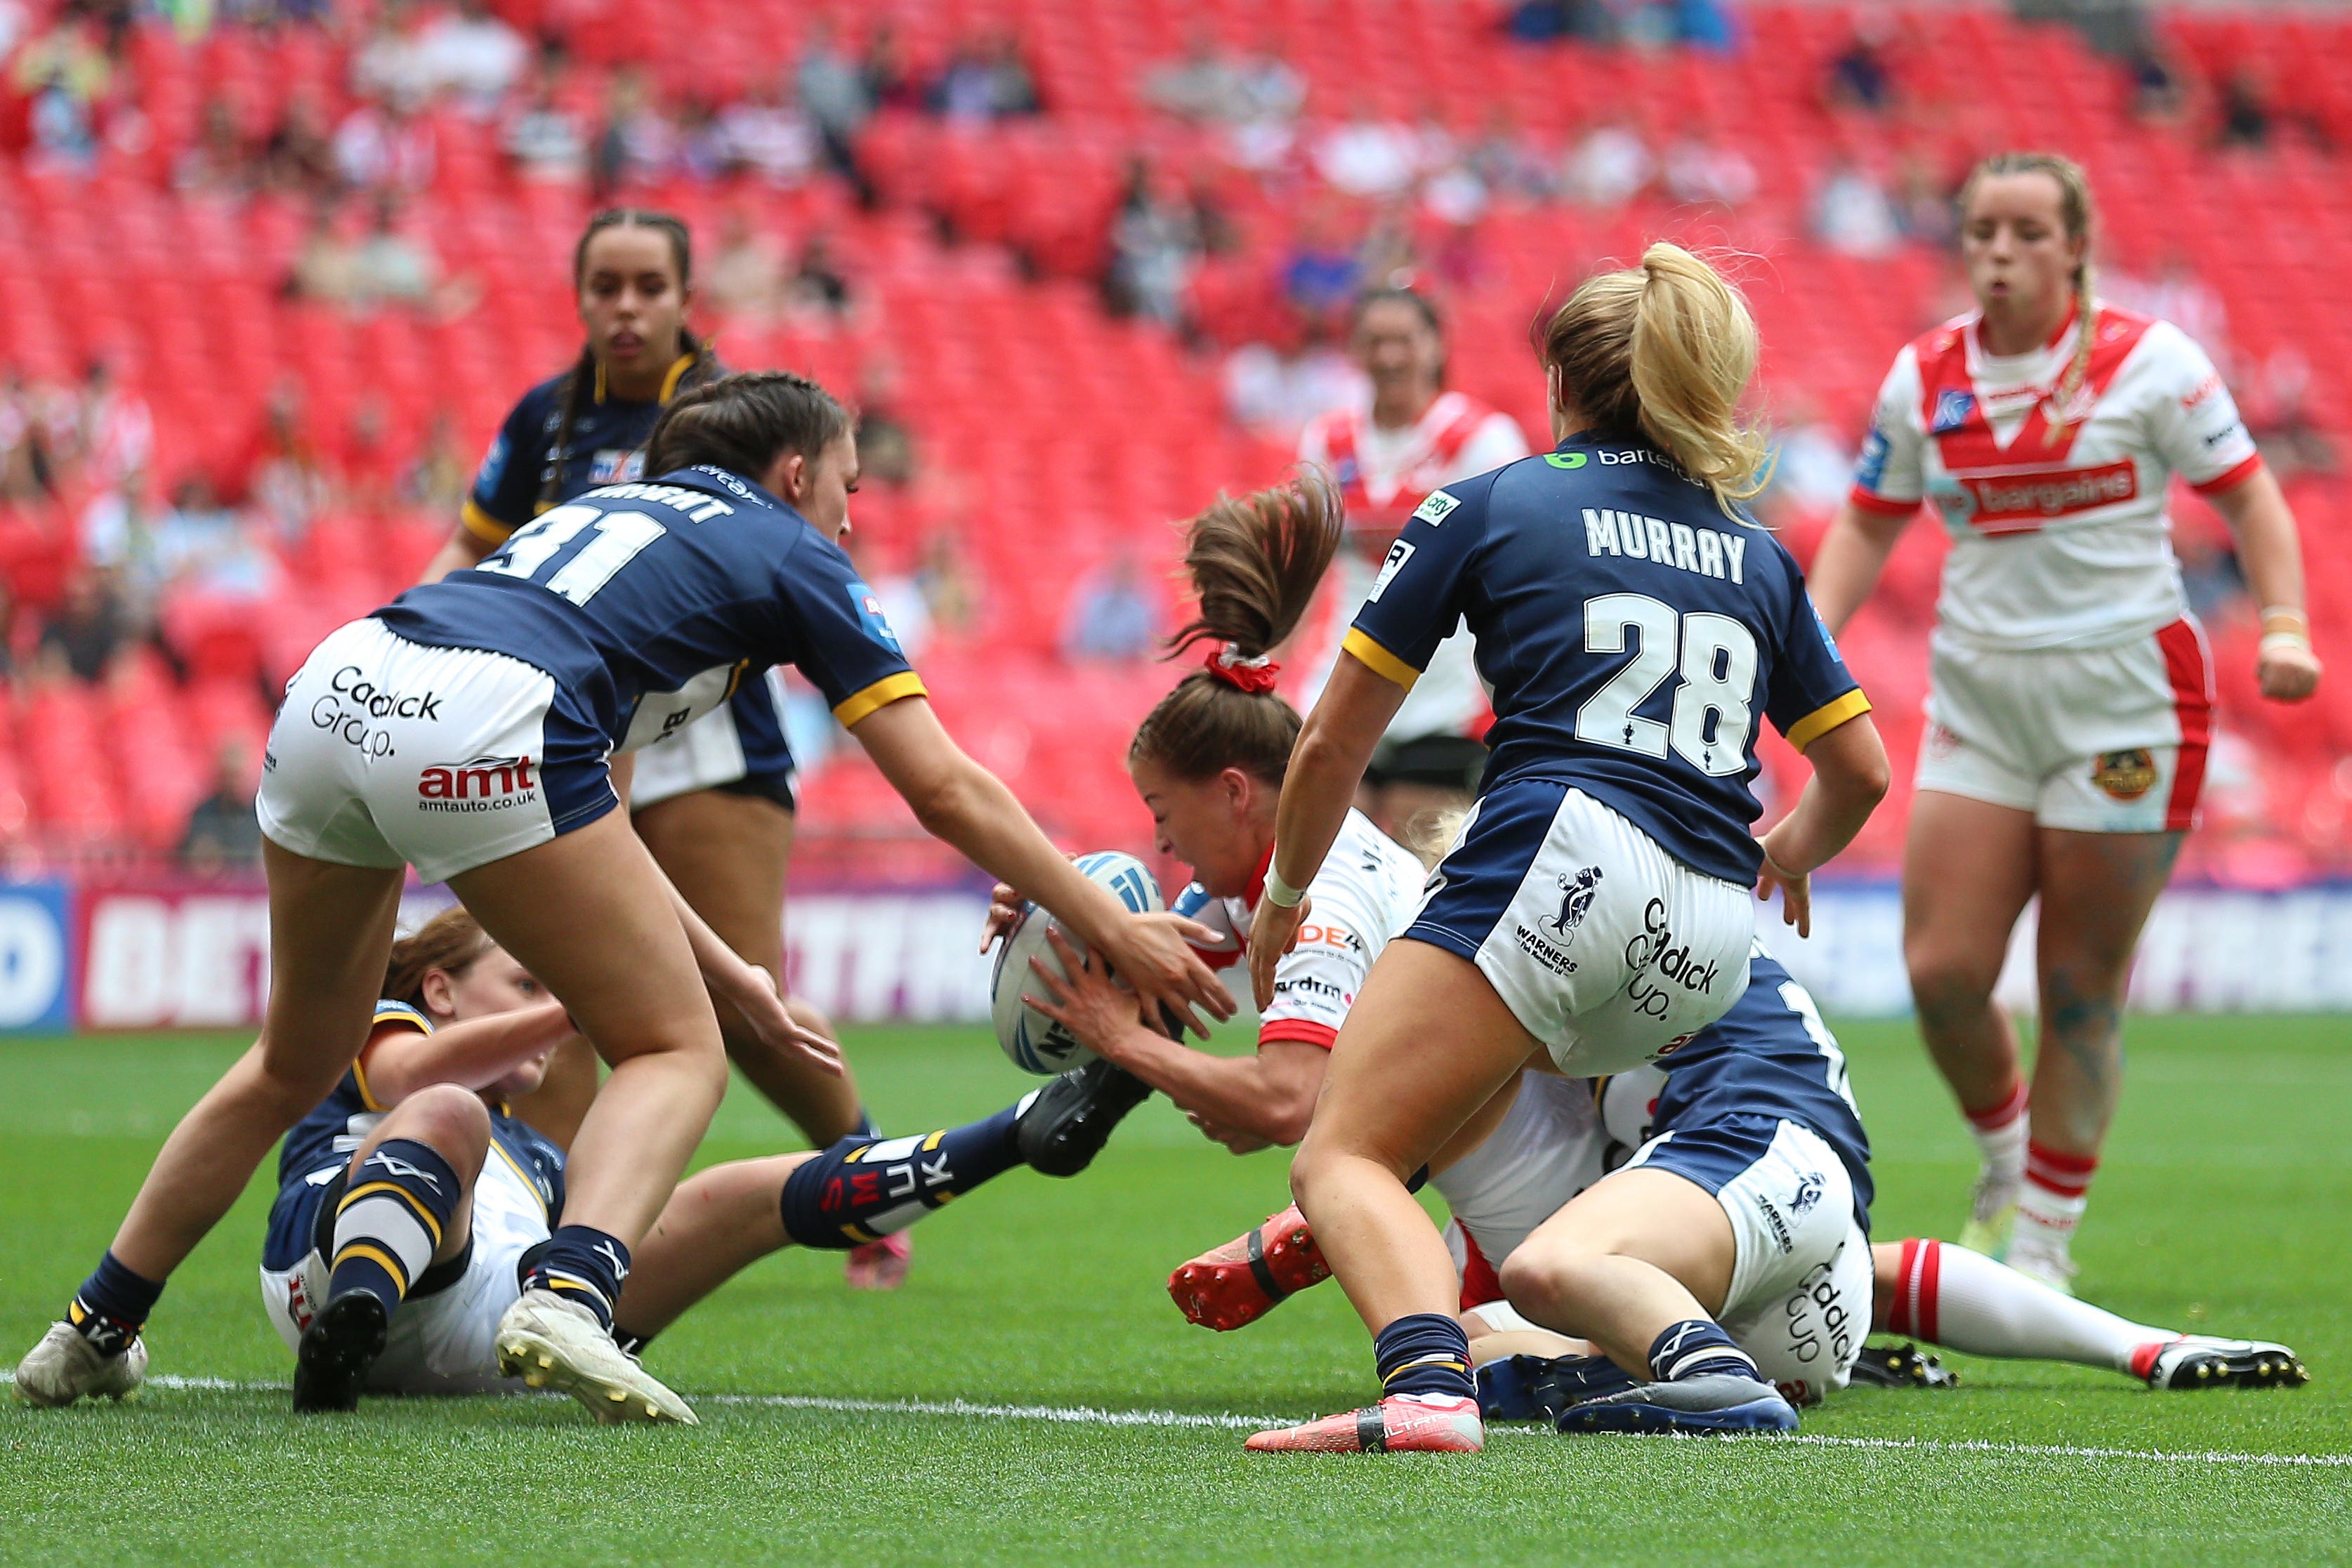 Tara Jones scored the opening try as St Helens went on to win the Betfred Women’s Challenge Cup final at Wembley (Nigel French/PA)